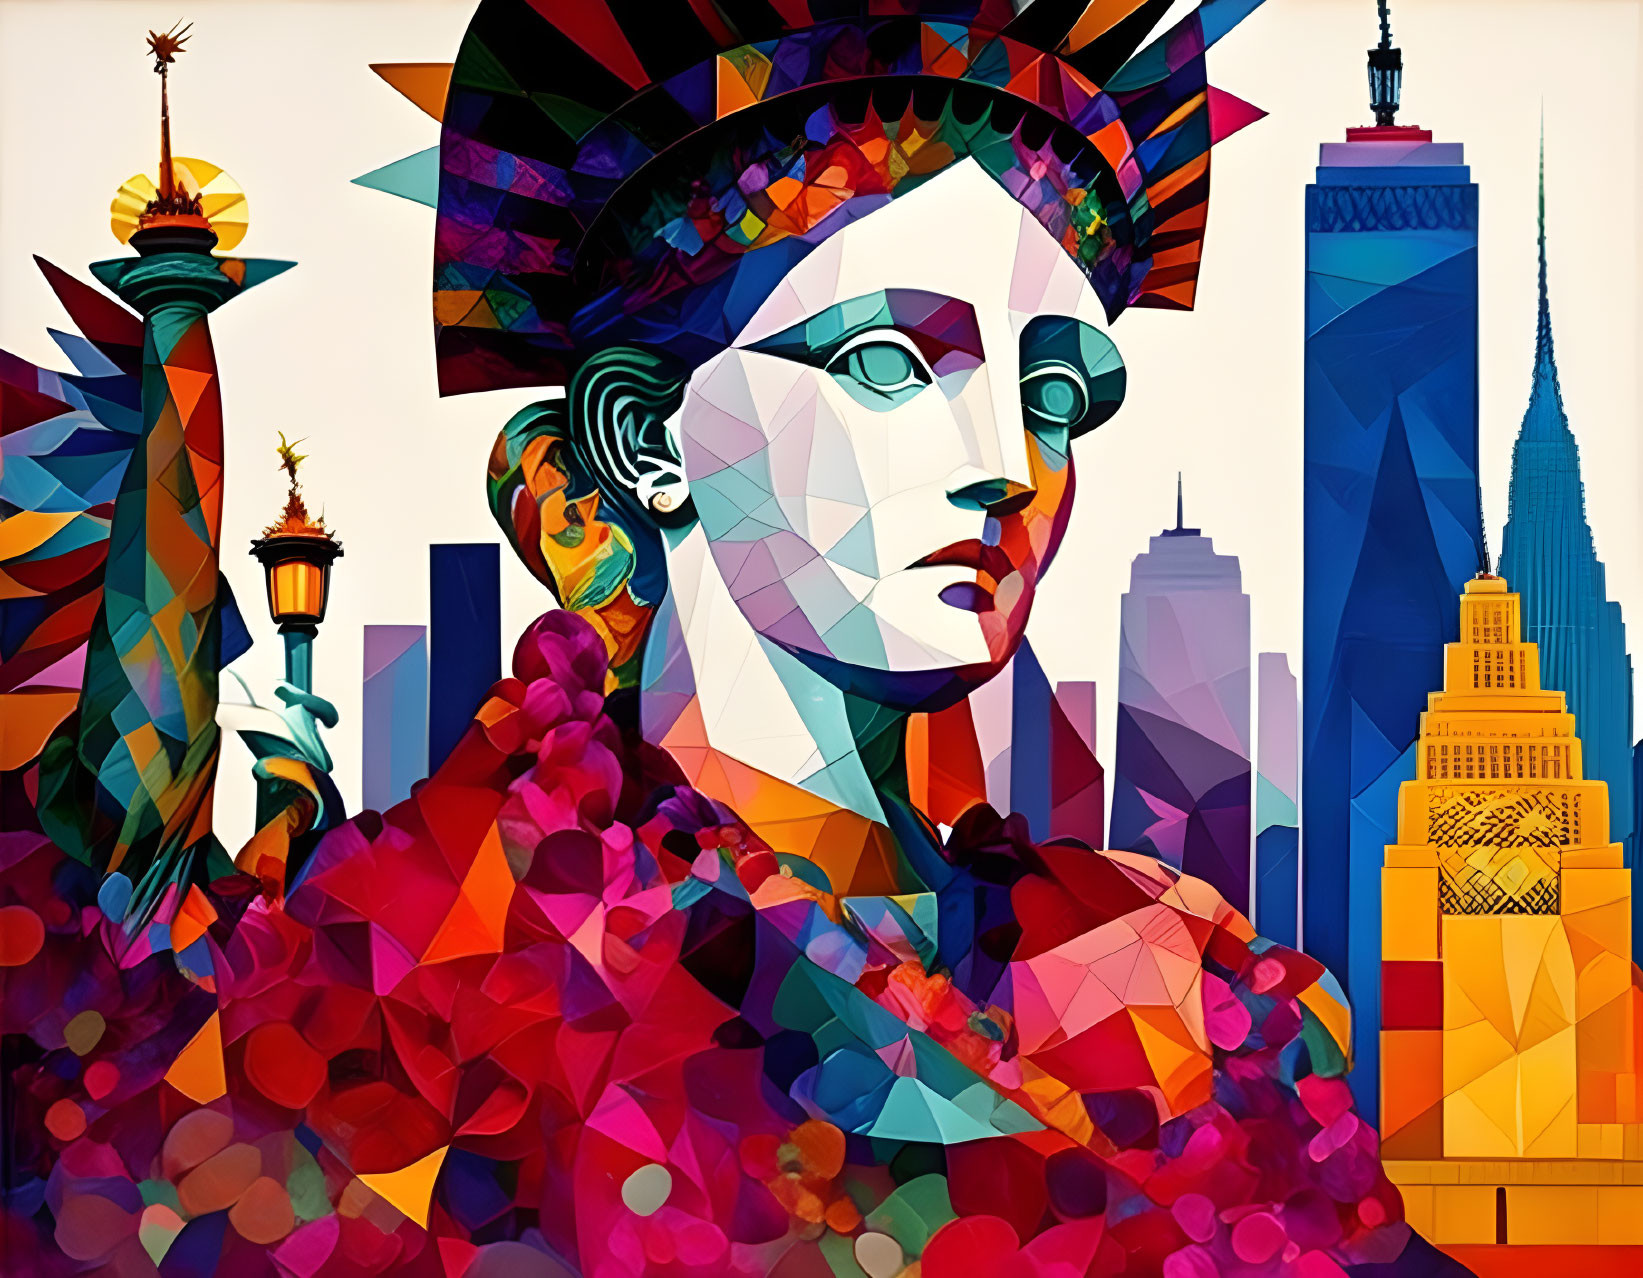 Vibrant Statue of Liberty illustration with NYC buildings and abstract pattern